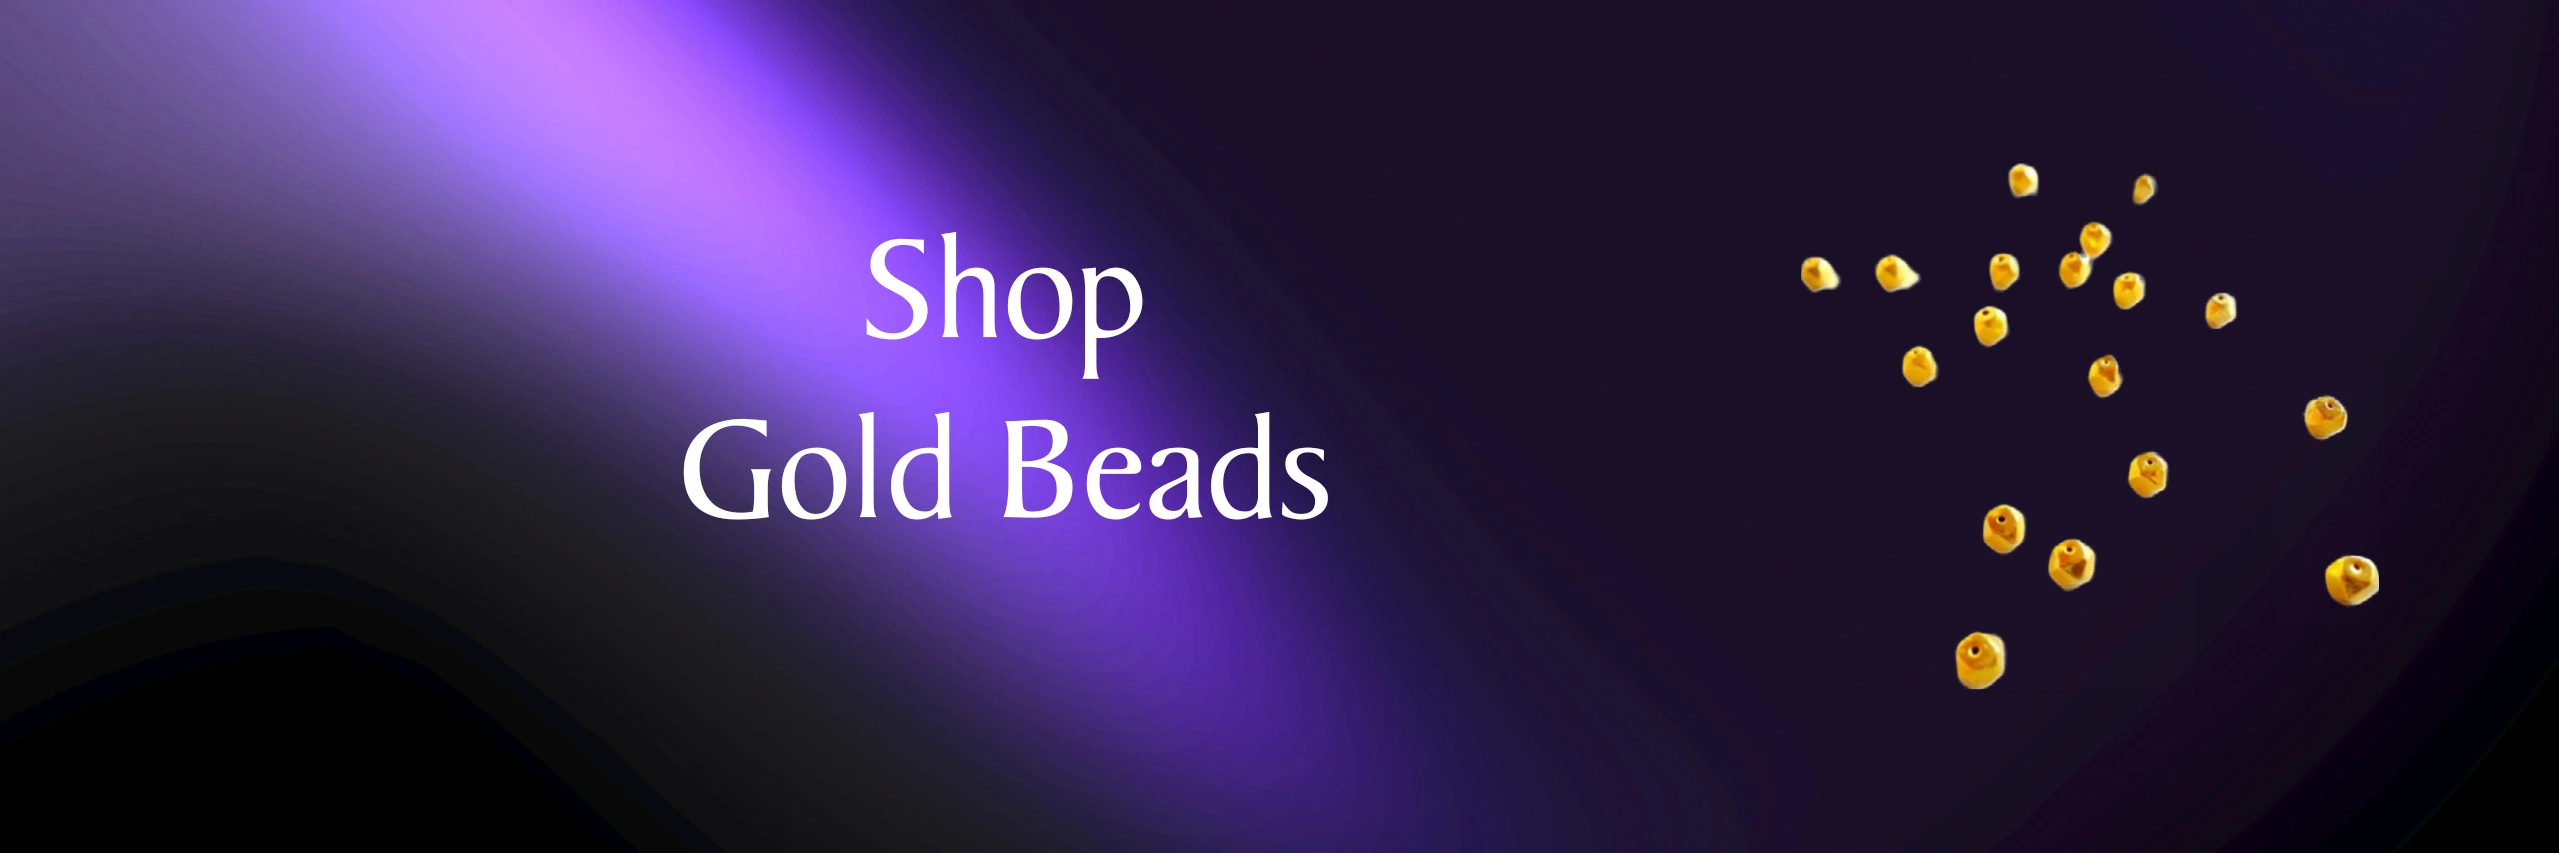 Shop Gold Beads Banner With Text